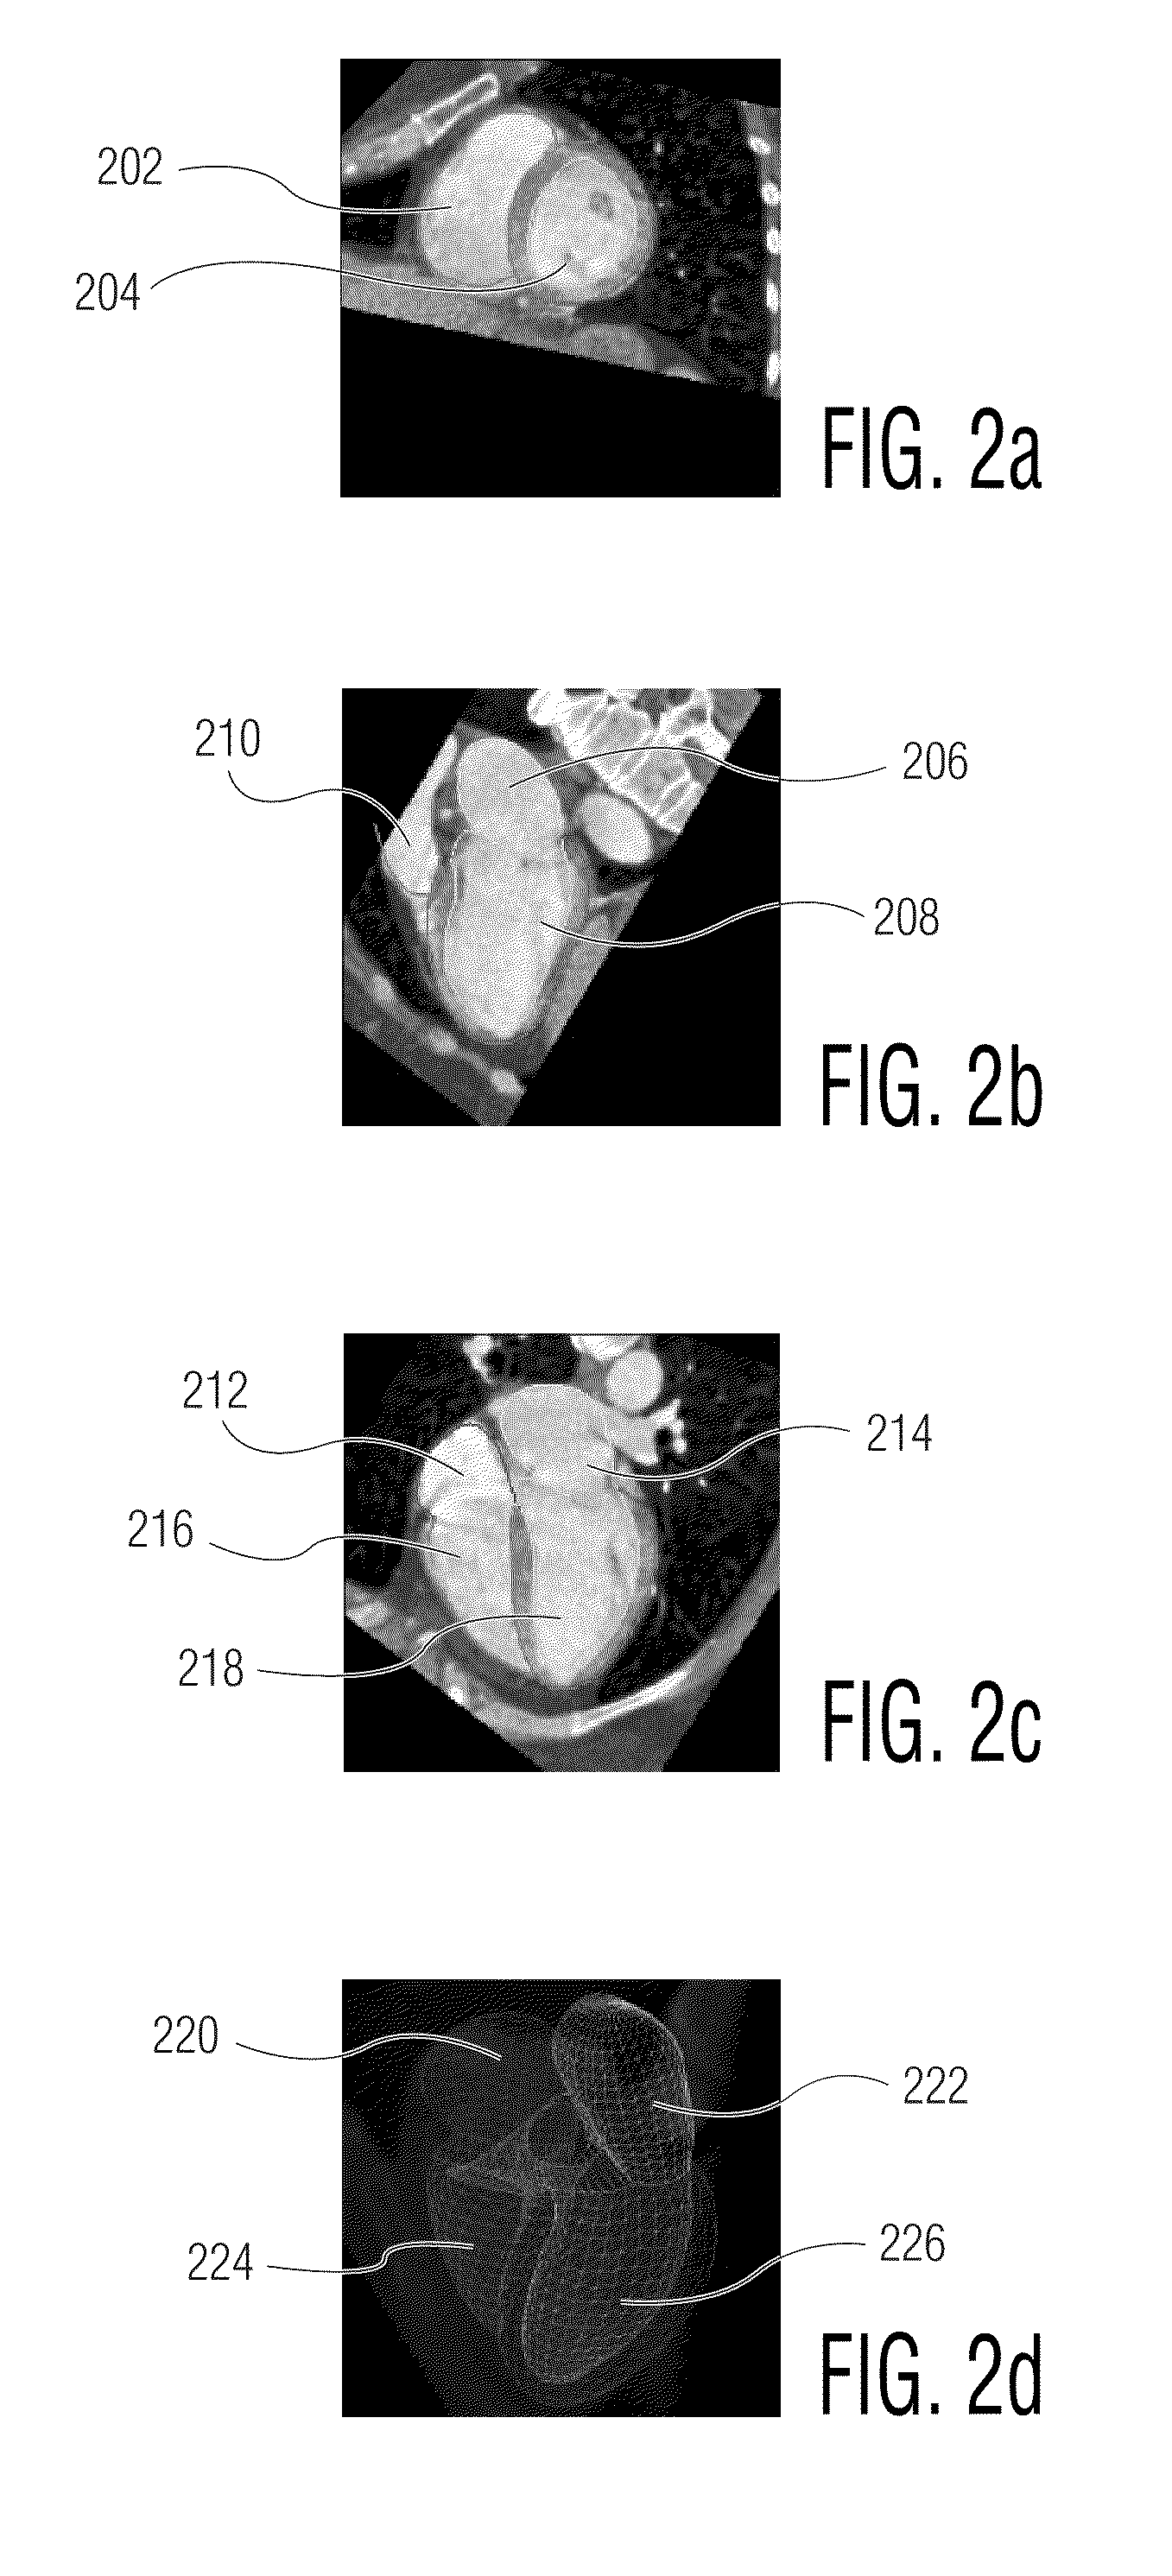 System and method for segmenting chambers of a heart in a three dimensional image